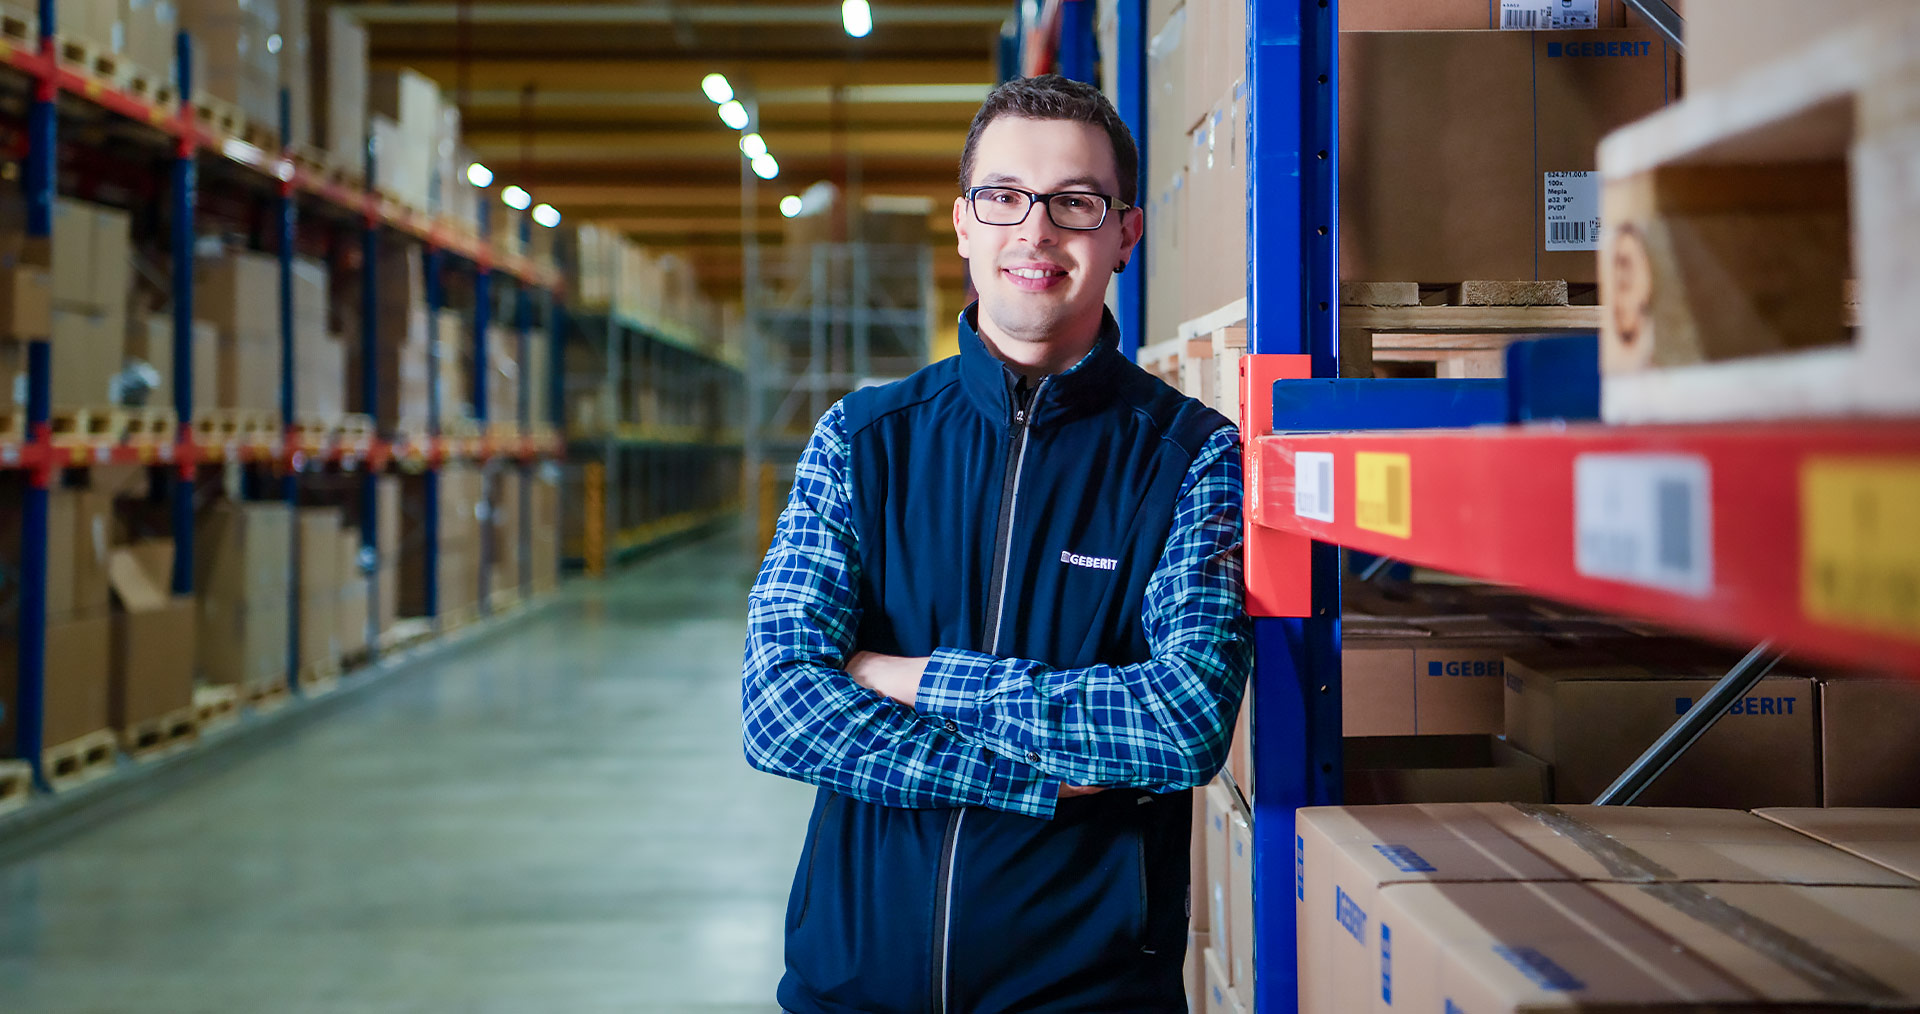 Stefan Matheis, Global Business Process Manager at Geberit, standing confidently in the warehouse